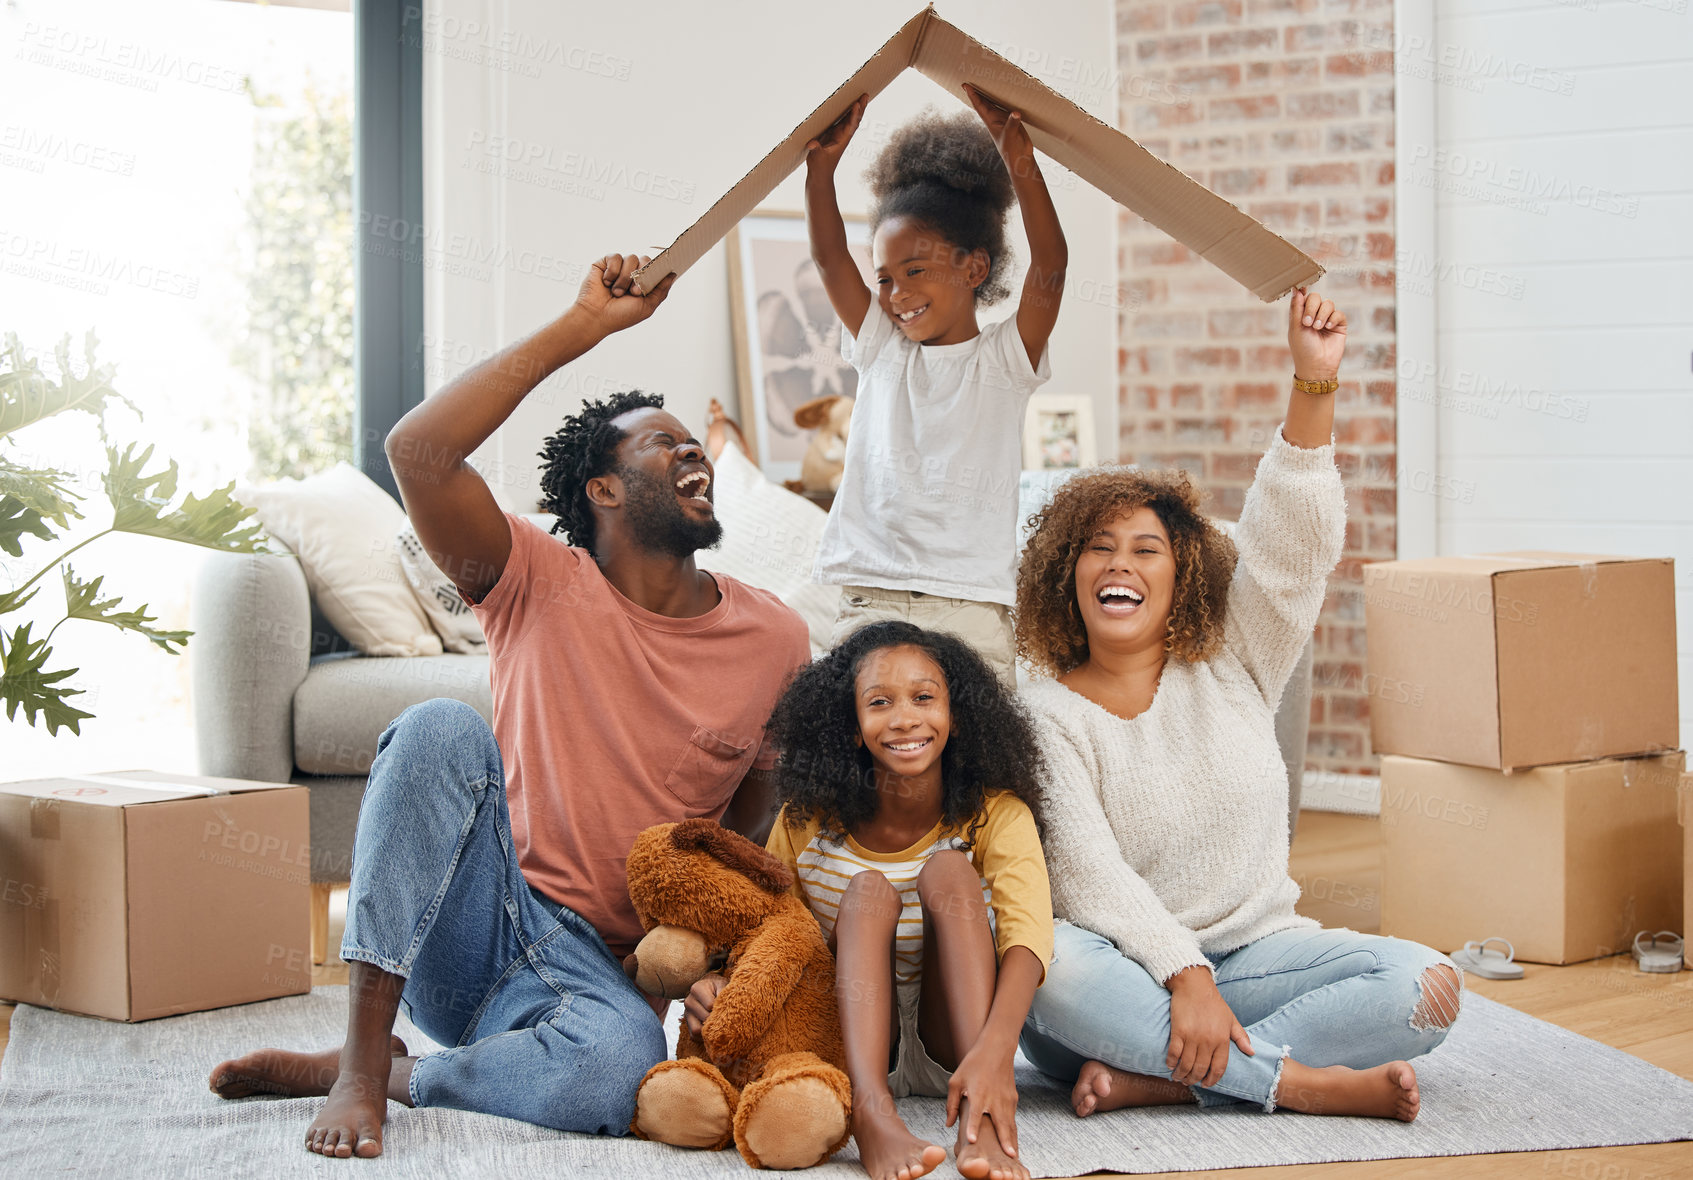 Buy stock photo Black family, floor and cardboard roof in home living room with game, laughing and bond with love. Father, mother and daughter with play, relax of box for sign of security in family house with smile